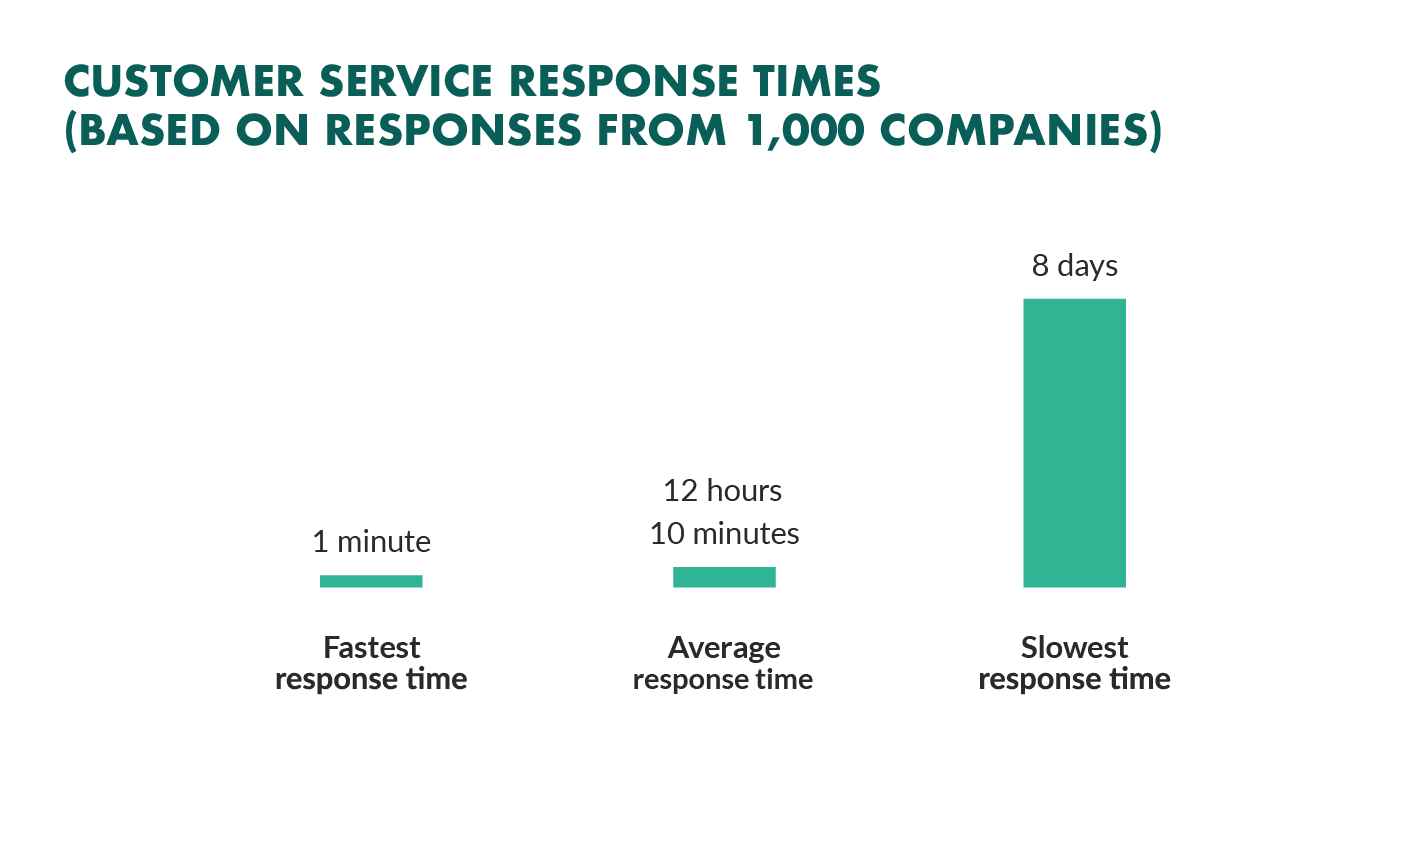 First reply time: 7 tips to deliver faster customer service